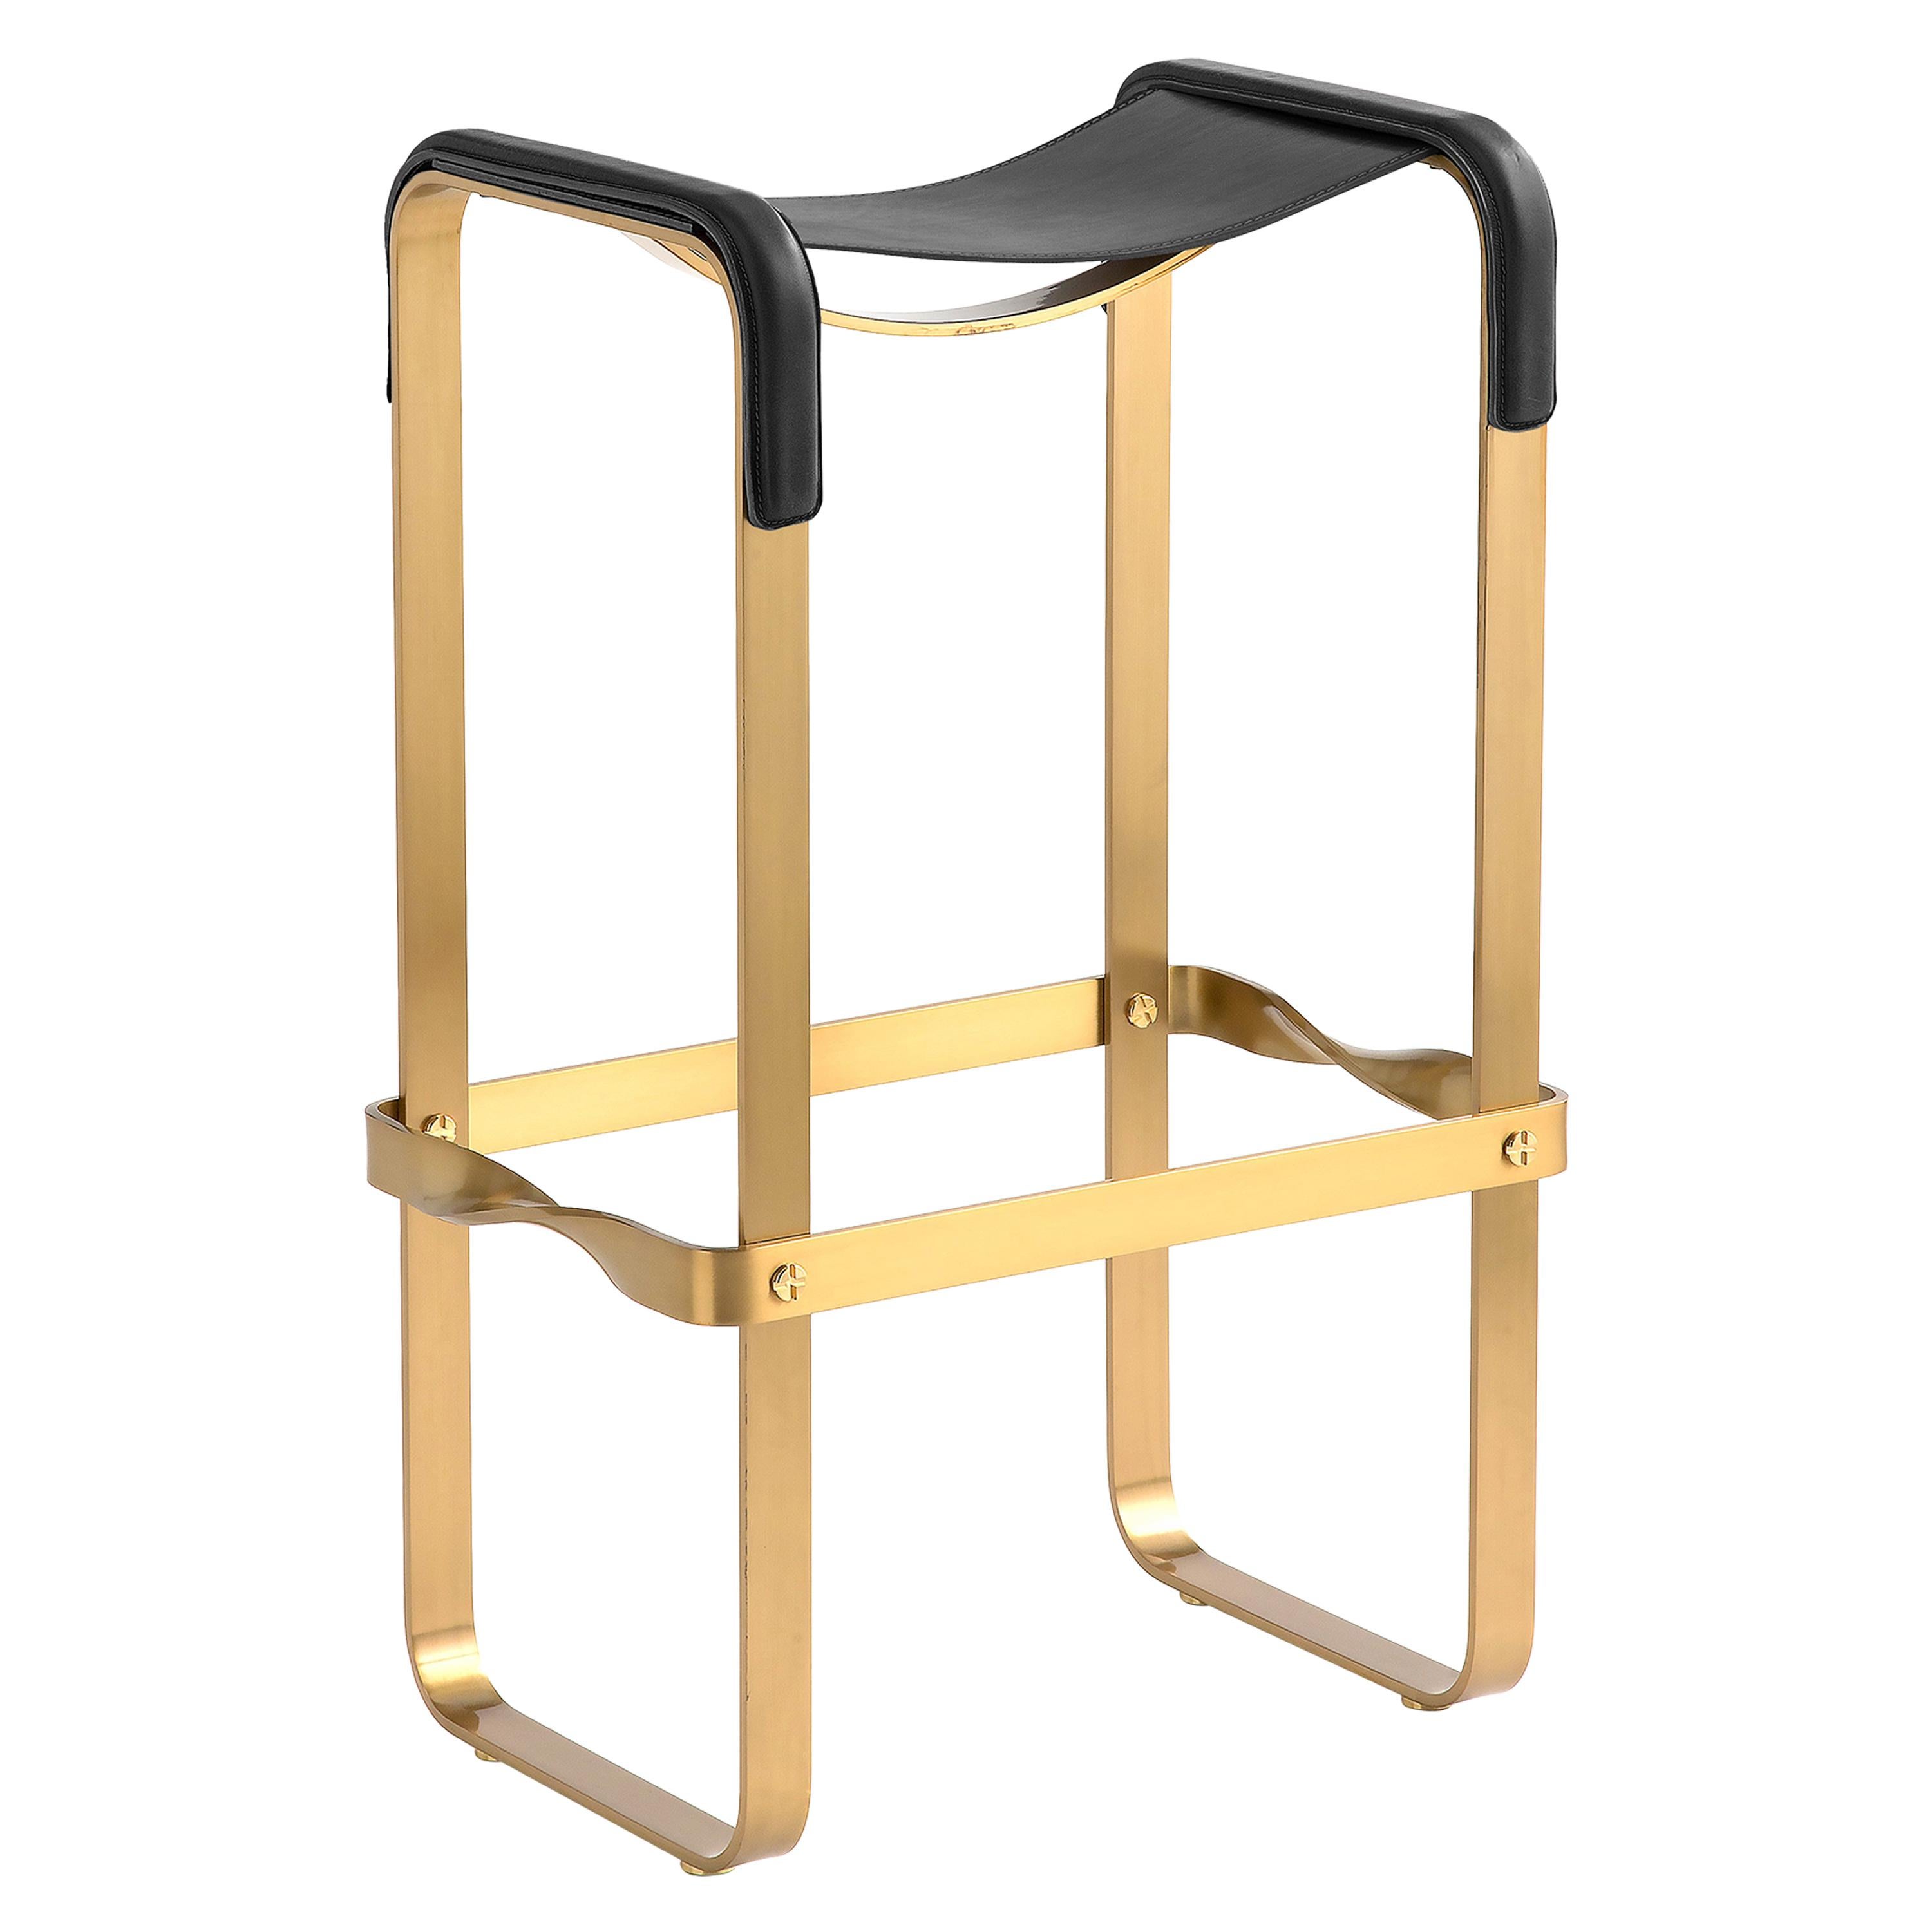 Classic Contemporary Bar Stool Aged Brass Metal Finish & Black Leather